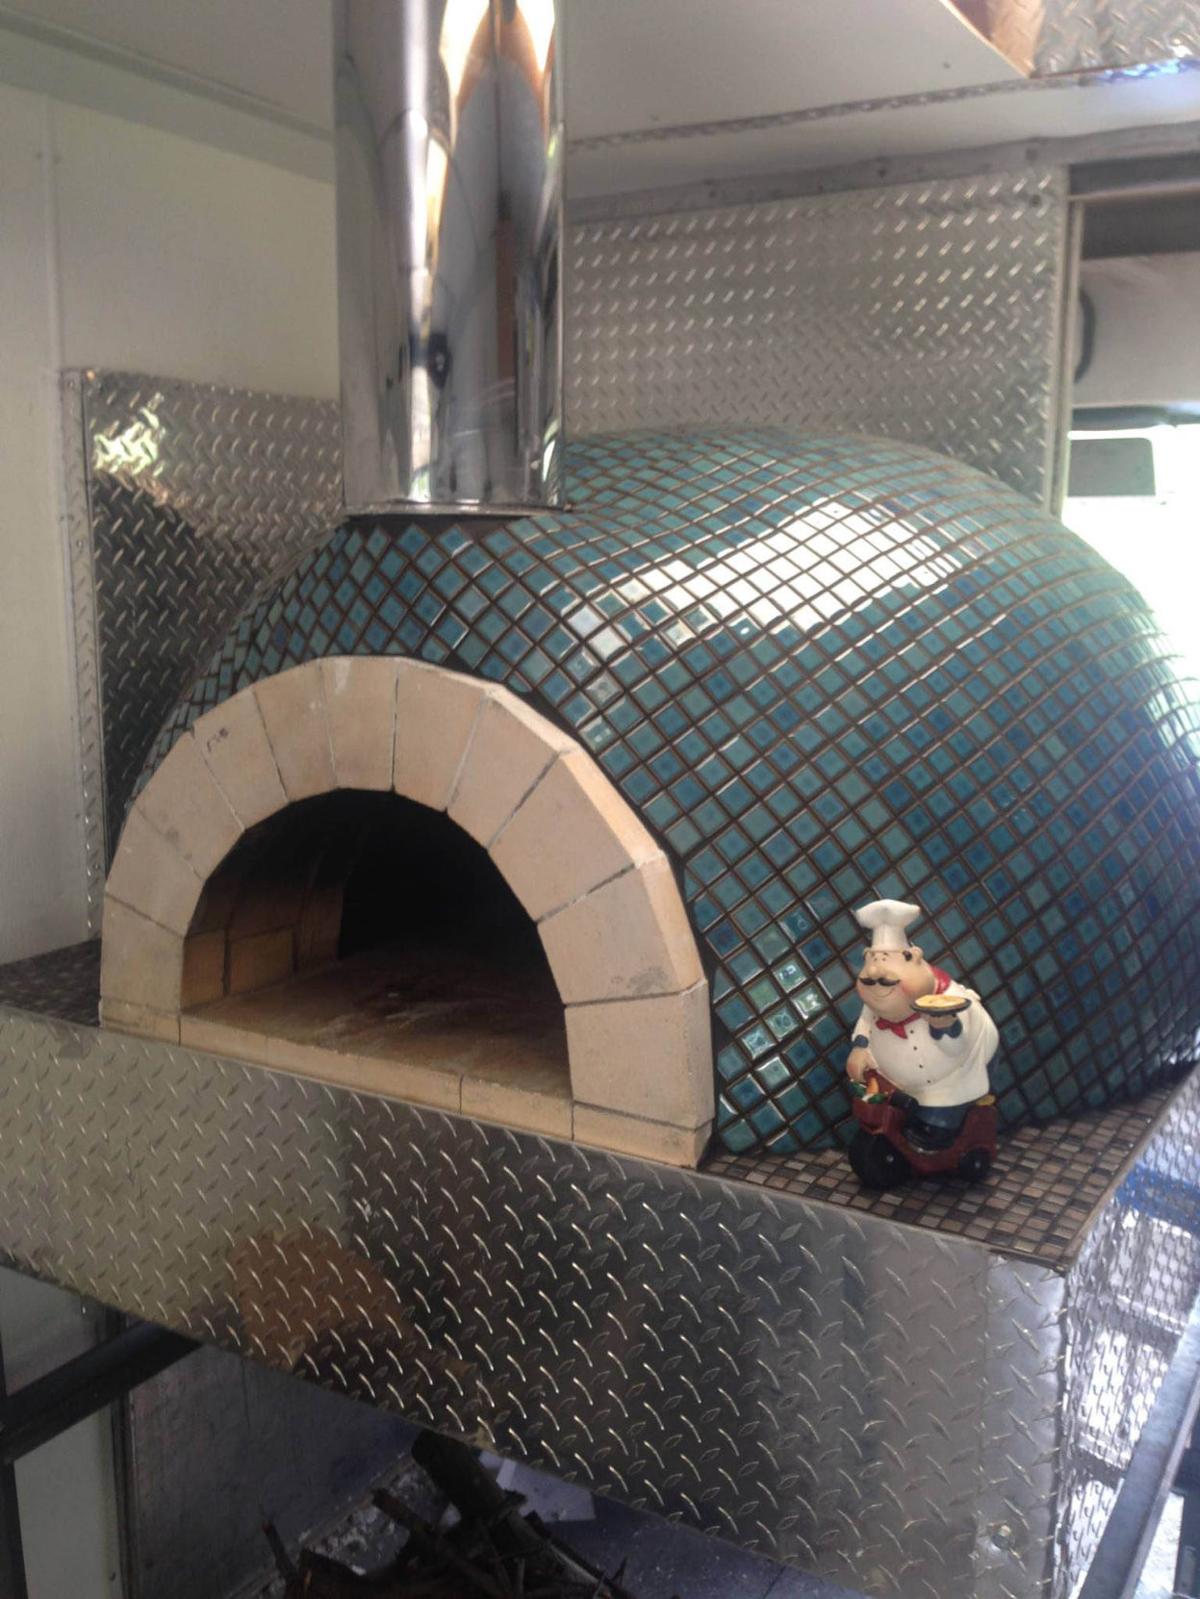 Fireplace Pan Fresh Pyro Pizza Jazzes Up Food Truck Talks Expansion